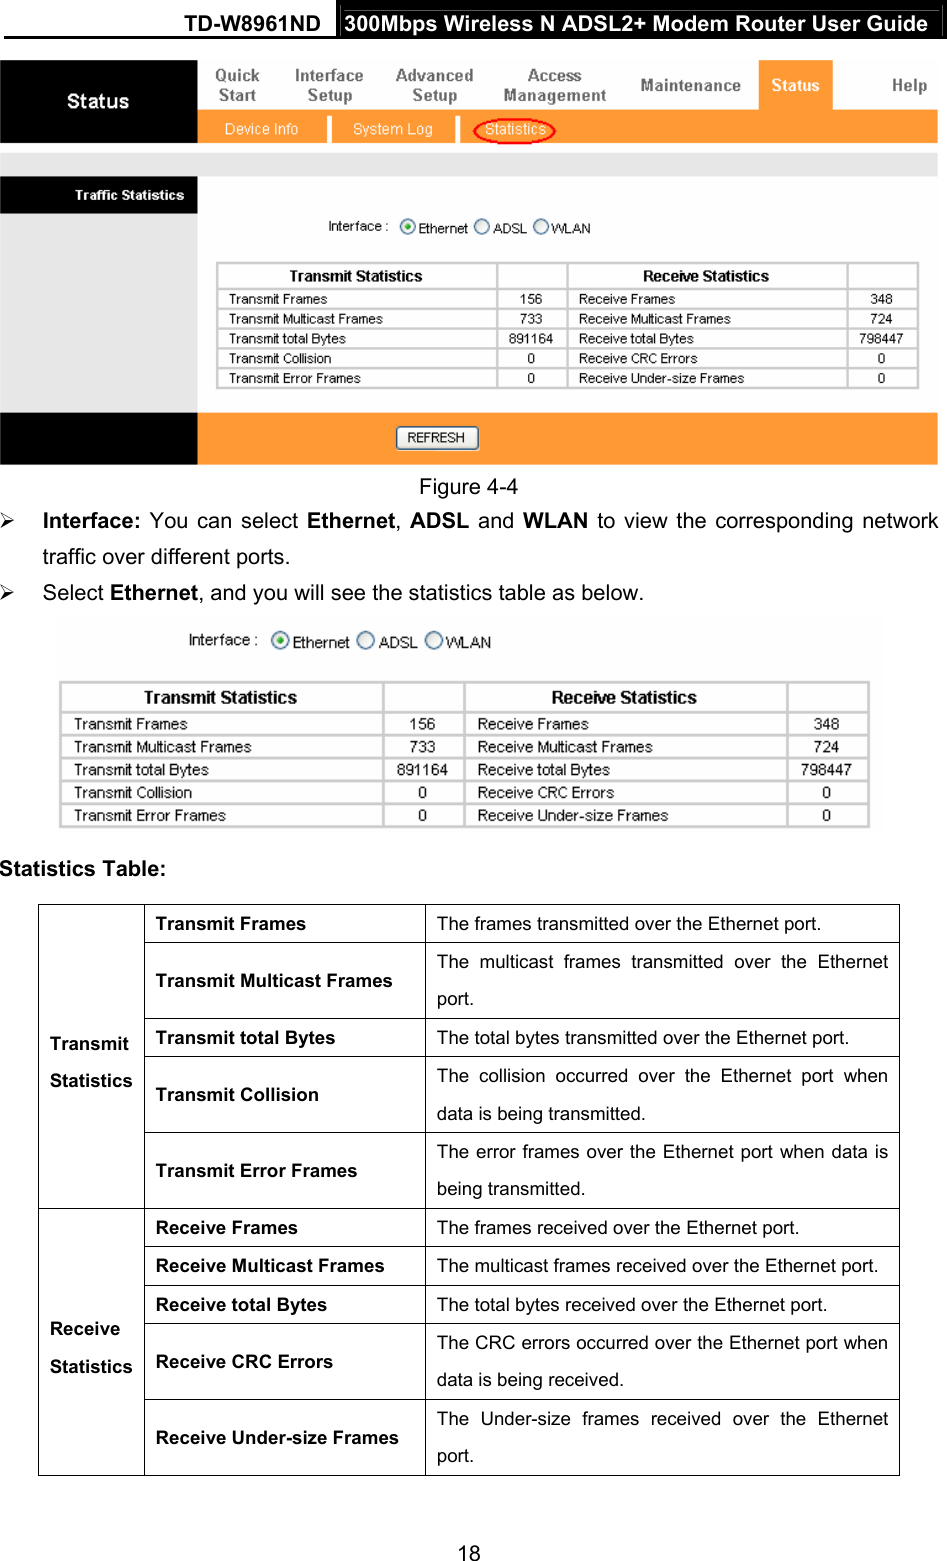 TD-W8961ND  300Mbps Wireless N ADSL2+ Modem Router User Guide  18 Figure 4-4 ¾ Interface:  You can select Ethernet, ADSL and WLAN to view the corresponding network traffic over different ports.   ¾ Select Ethernet, and you will see the statistics table as below.  Statistics Table: Transmit Frames  The frames transmitted over the Ethernet port. Transmit Multicast Frames The multicast frames transmitted over the Ethernet port. Transmit total Bytes  The total bytes transmitted over the Ethernet port. Transmit Collision The collision occurred over the Ethernet port when data is being transmitted. Transmit Statistics Transmit Error Frames The error frames over the Ethernet port when data is being transmitted.   Receive Frames  The frames received over the Ethernet port. Receive Multicast Frames  The multicast frames received over the Ethernet port. Receive total Bytes  The total bytes received over the Ethernet port. Receive CRC Errors The CRC errors occurred over the Ethernet port when data is being received. Receive Statistics Receive Under-size Frames The Under-size frames received over the Ethernet port.  